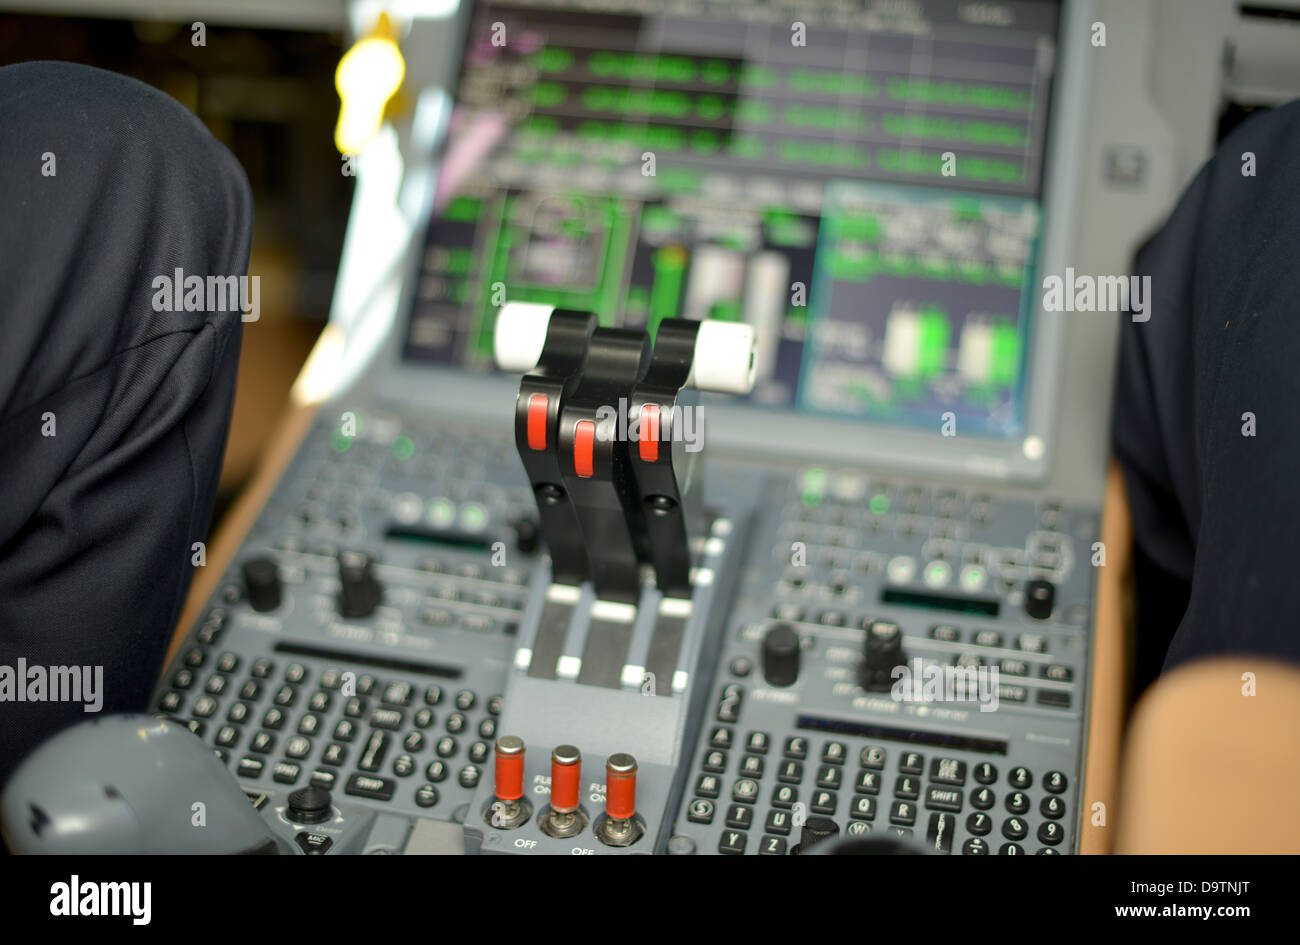 throttle levers in control panel in the cockpit of a jet plane Stock Photo